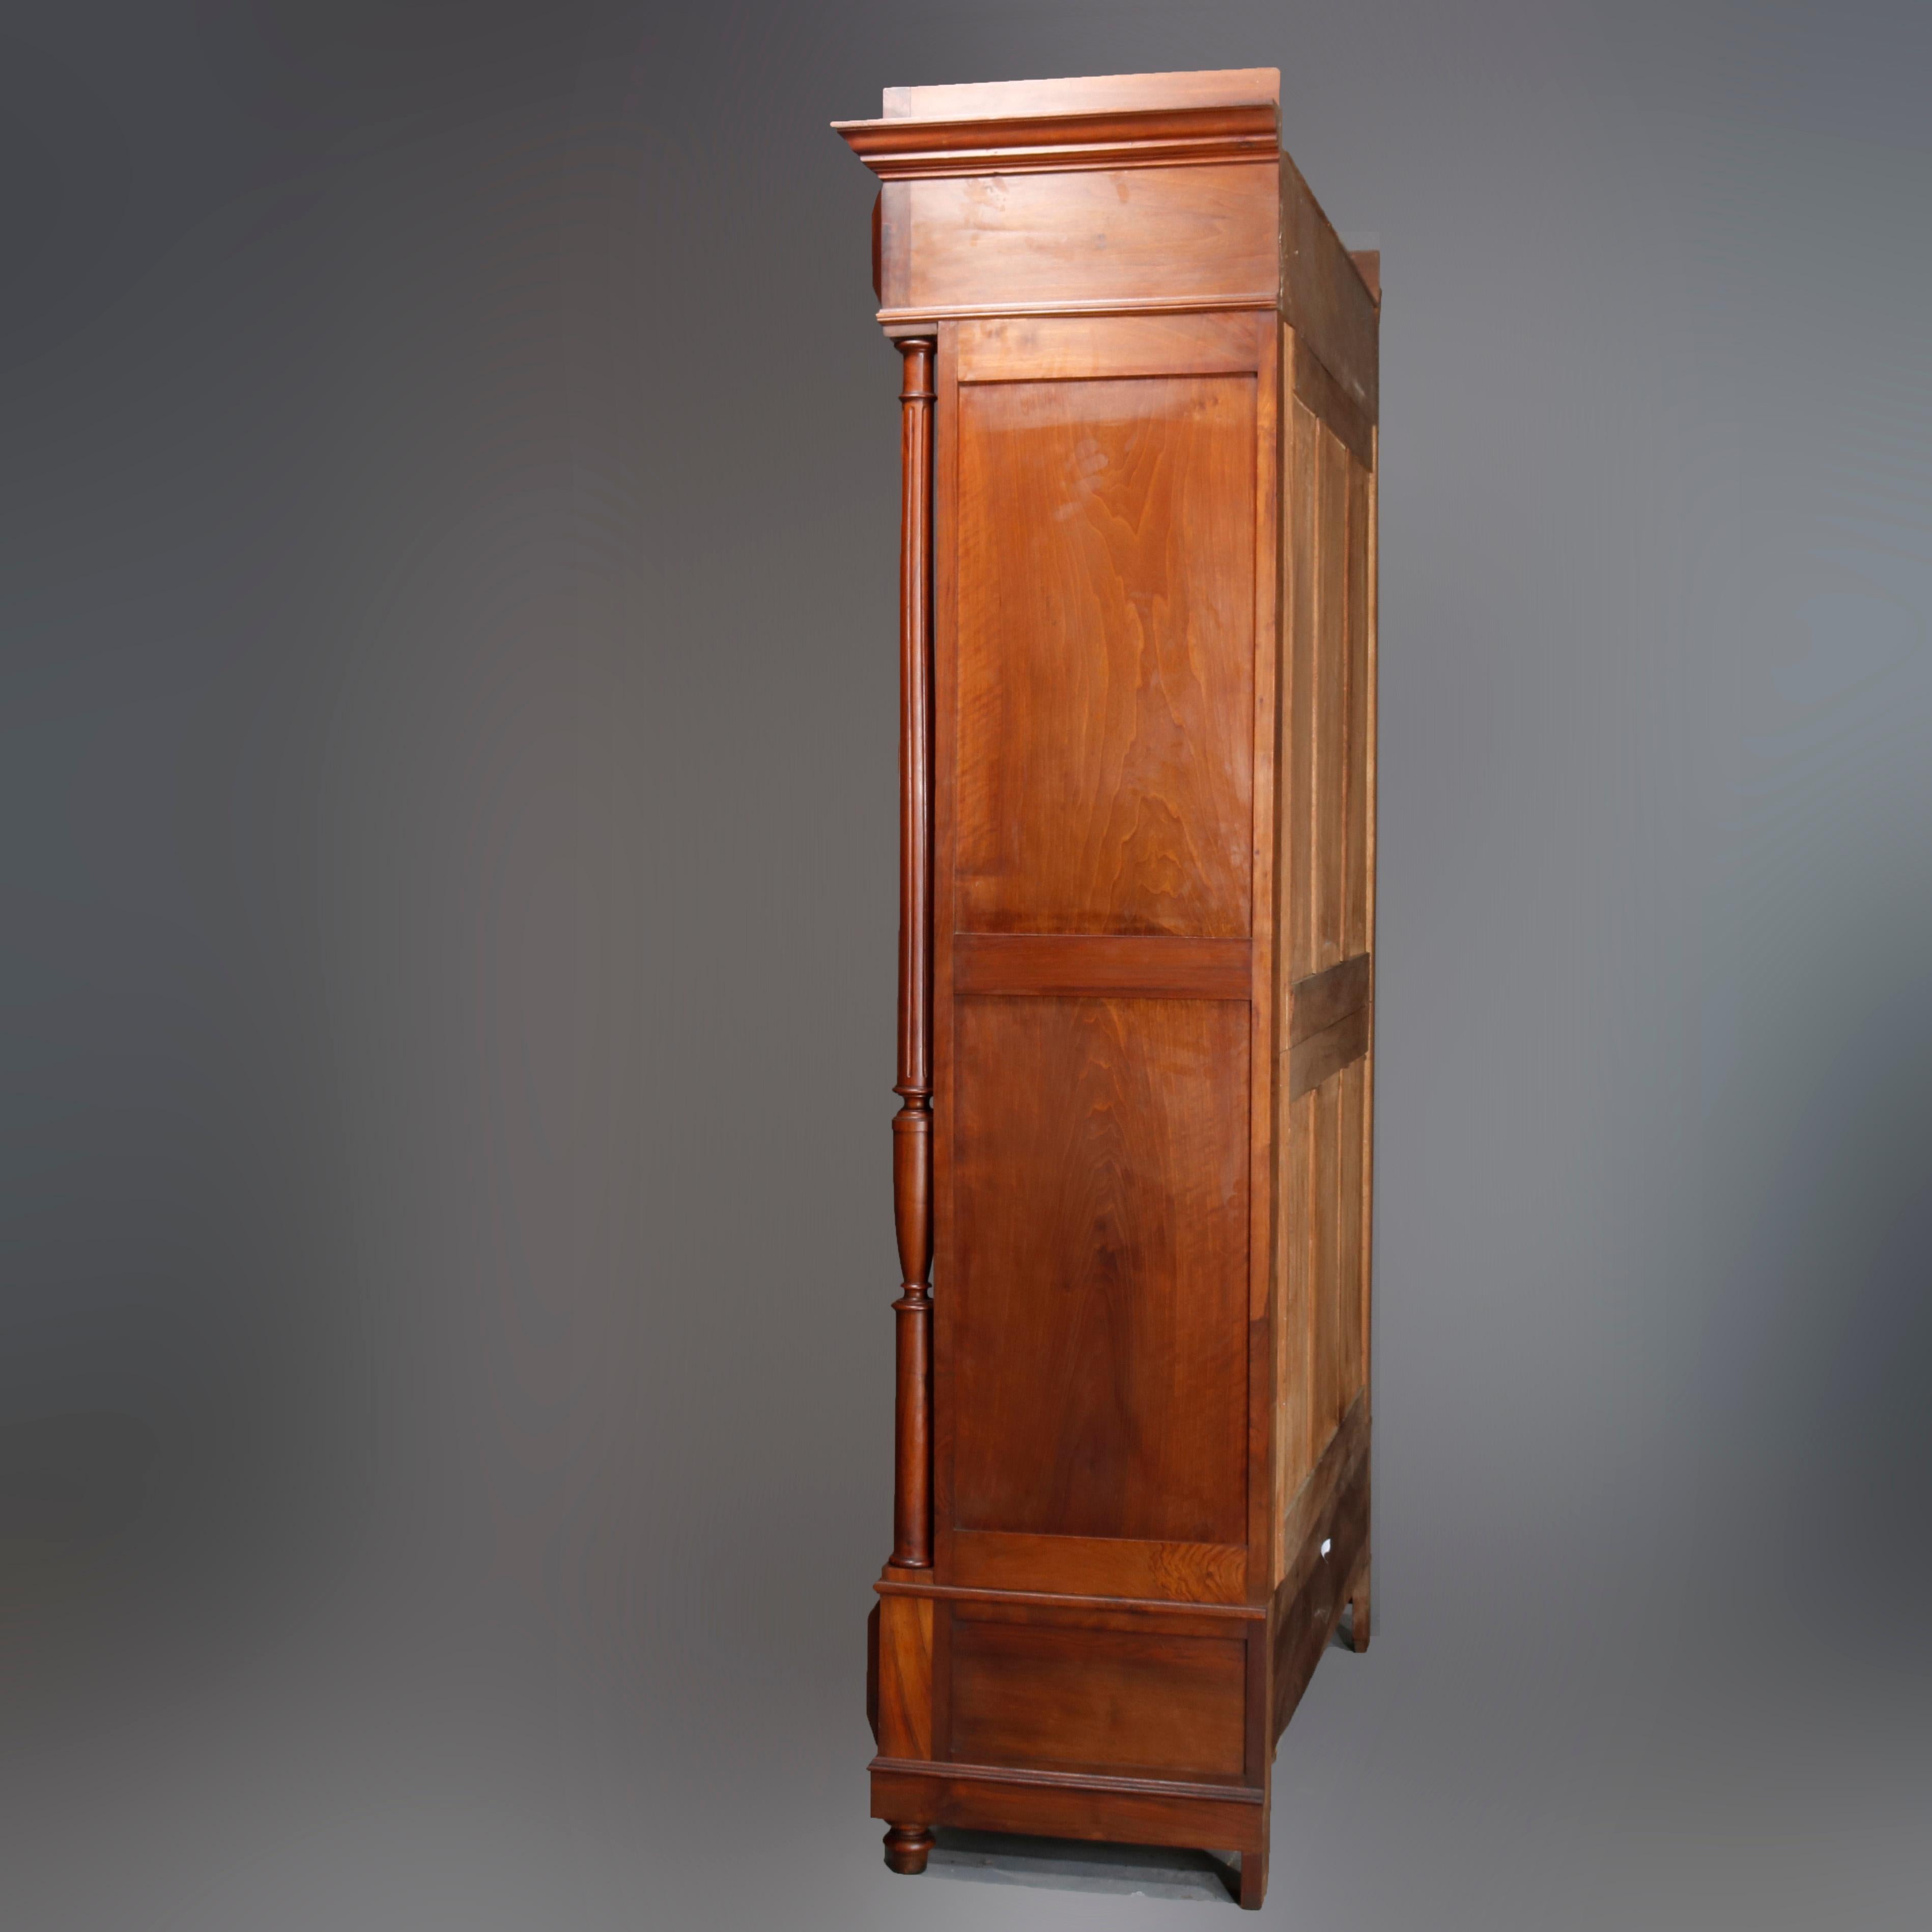 Antique French Renaissance carved walnut double door Armoire with fluted frieze, surmounting beveled mirrors with flanking full turned columns, single lower long drawer, pyramidal elements, raised on Marseille bun feet, 19th century.

Measures: